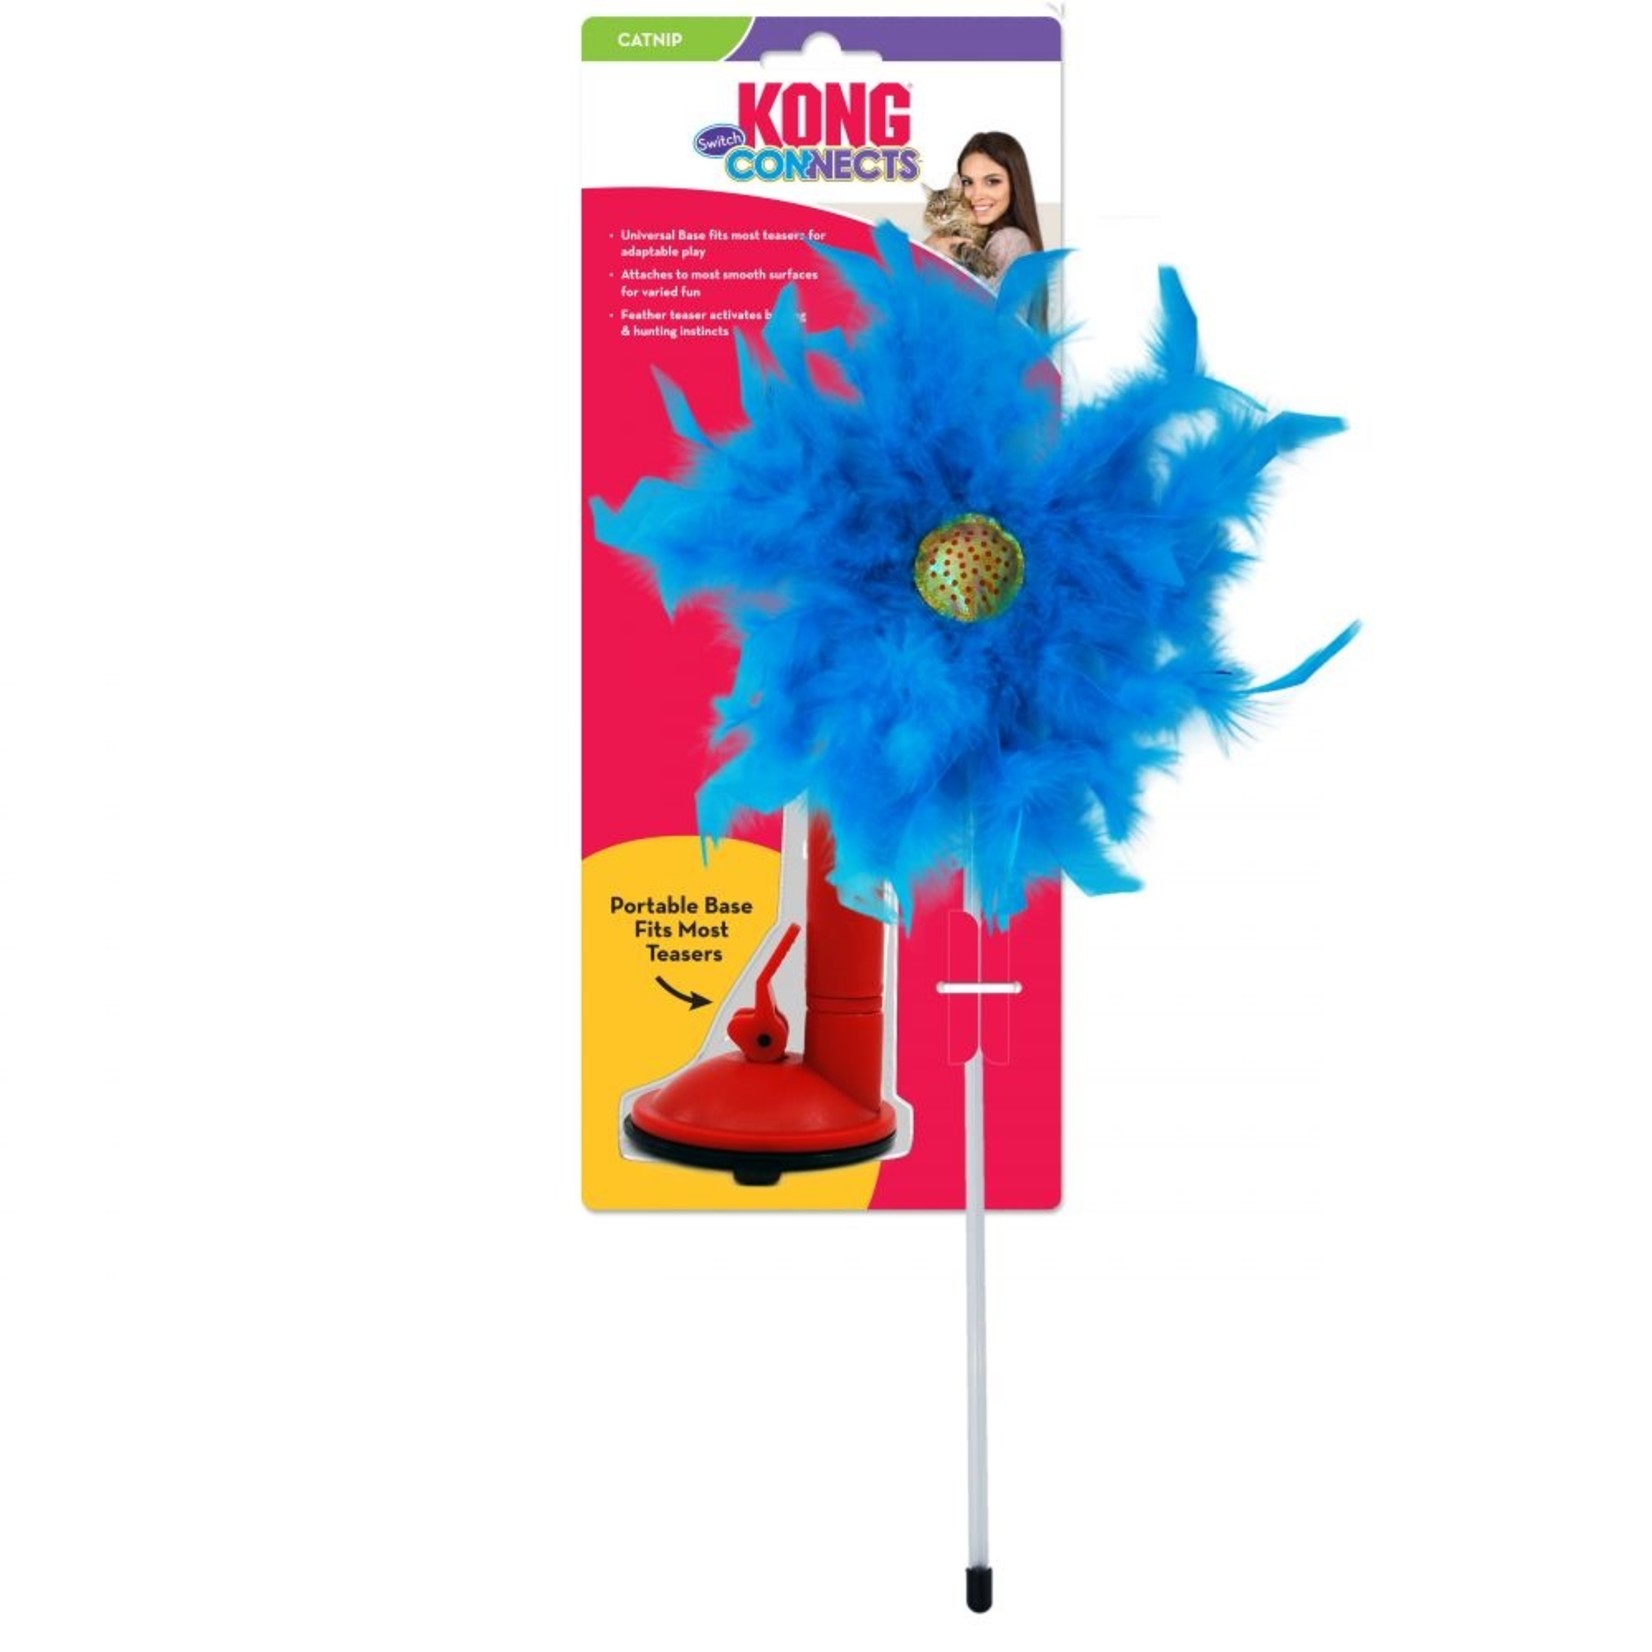 Kong Kong Cat Connects Switch Teaser Feathers Interactive Mounted Cat Toy